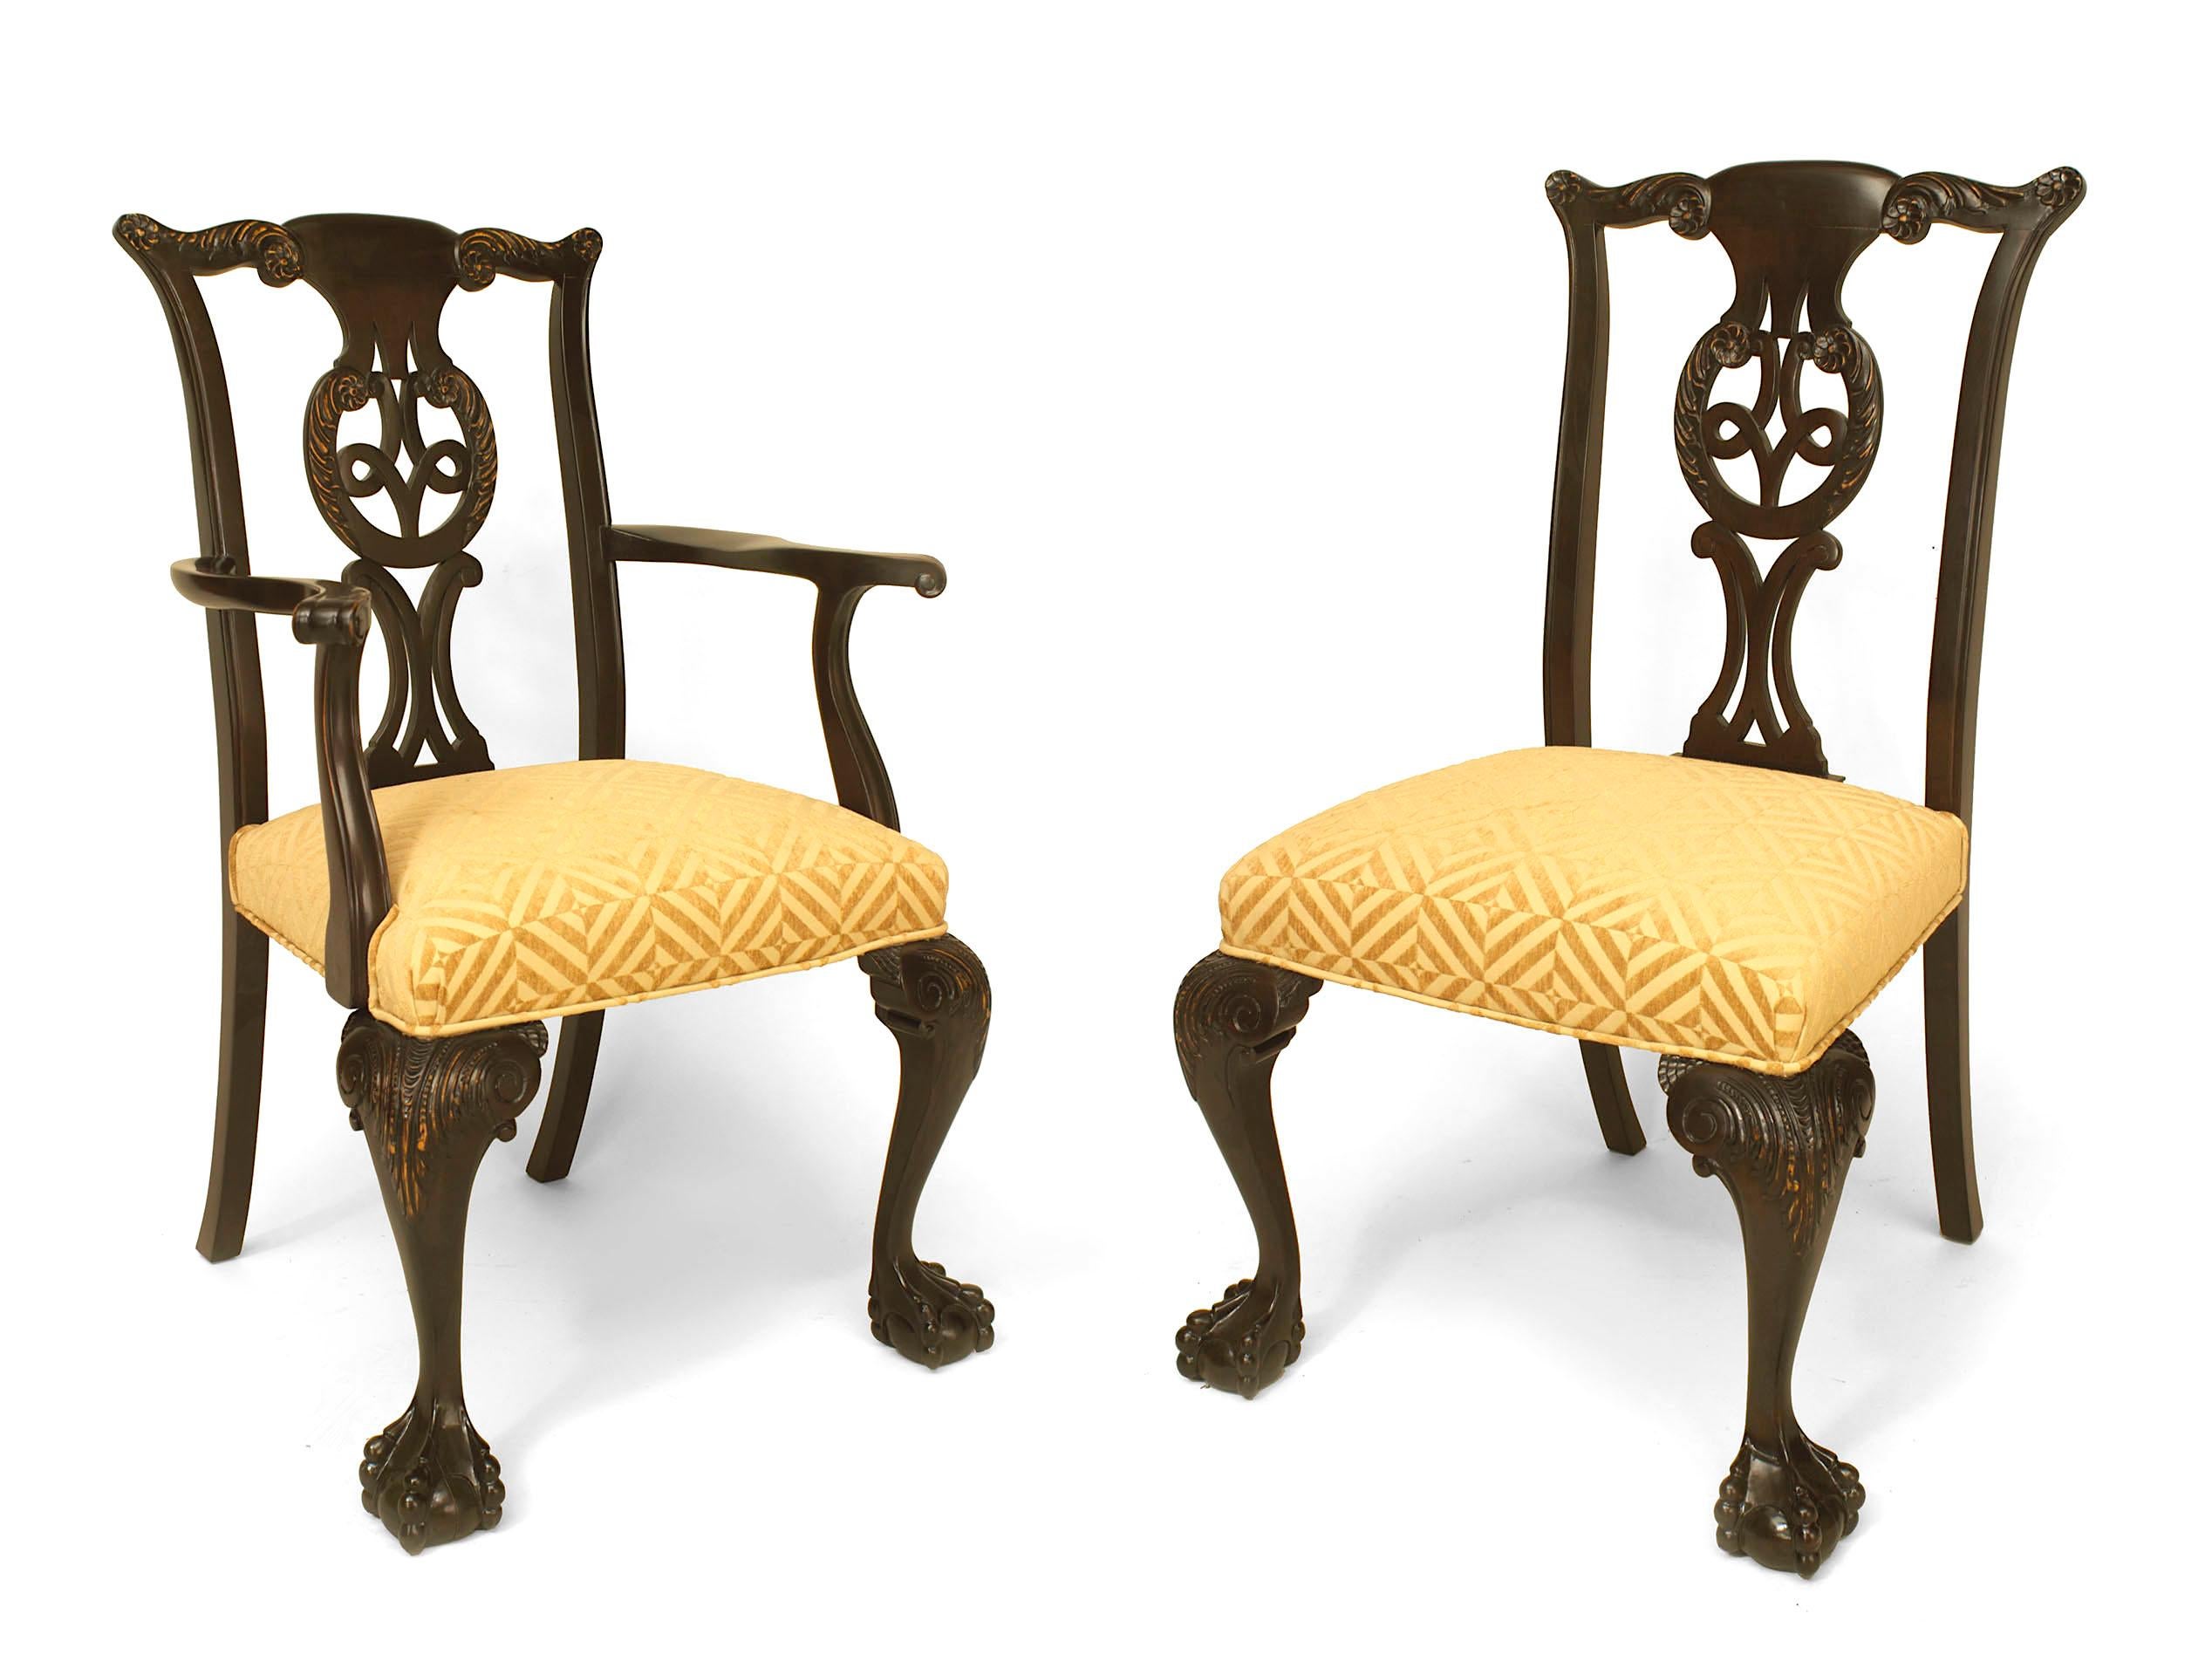 Set of 12 (2 arms/10 sides) Irish George II style (19/20th Cent) carved elm wood chairs with pierced carved backs and patterned chenille slip seats (arms 23